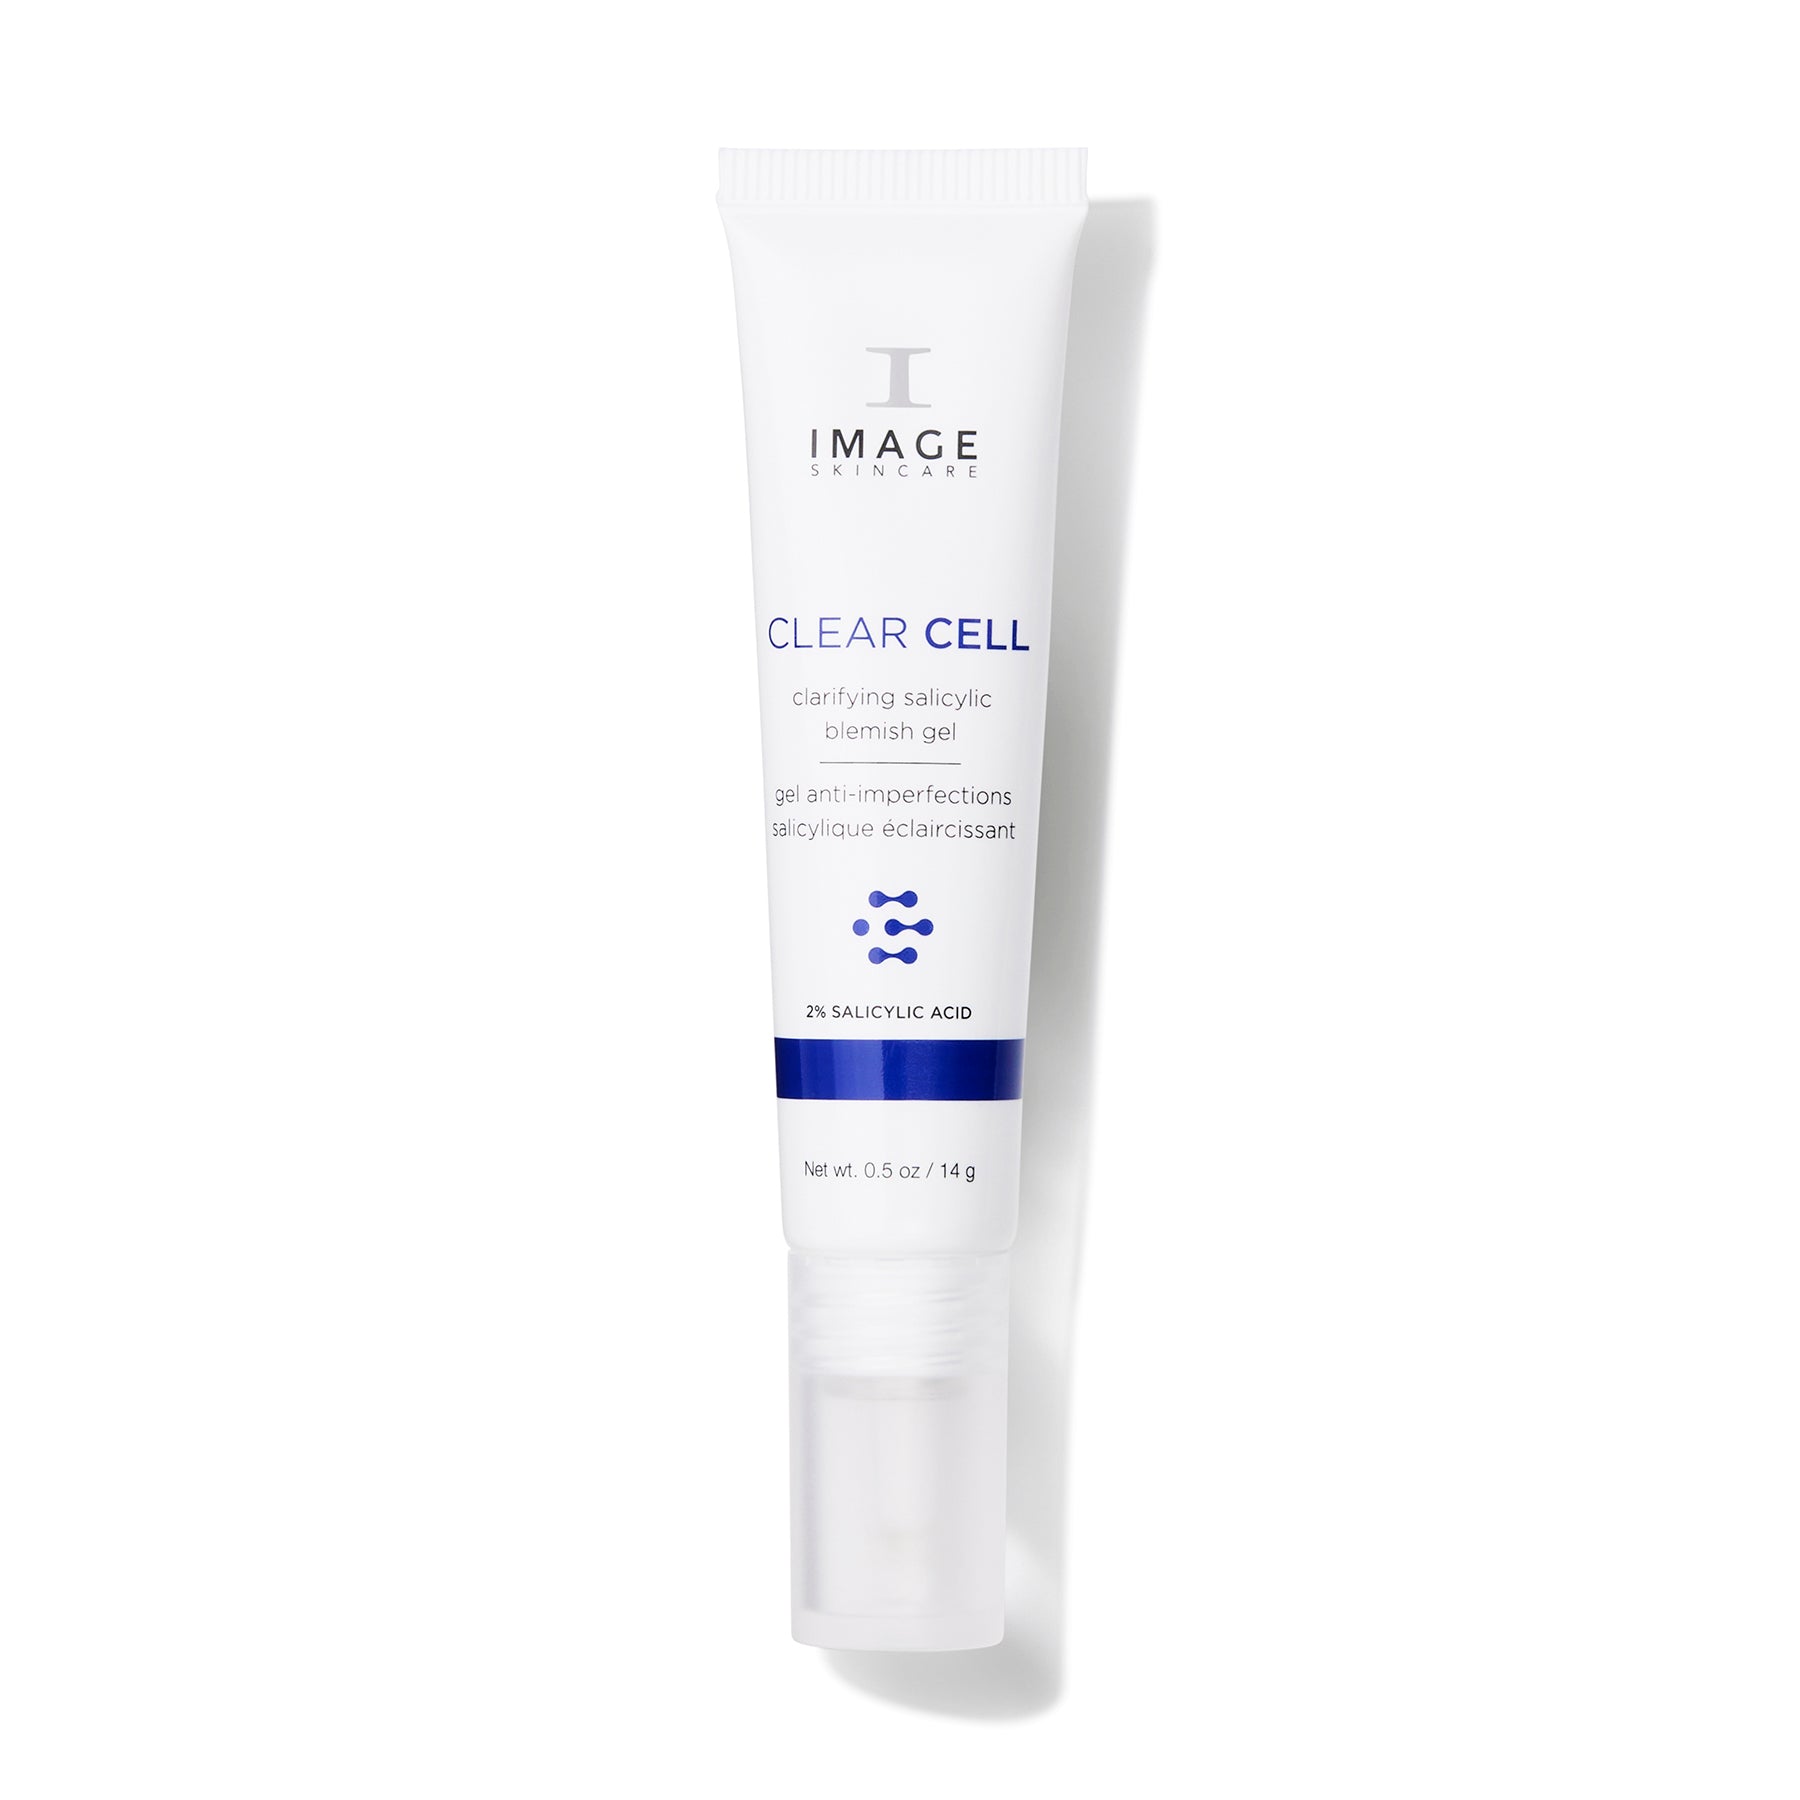 IMAGE Skincare Clear Cell Blemish Gel